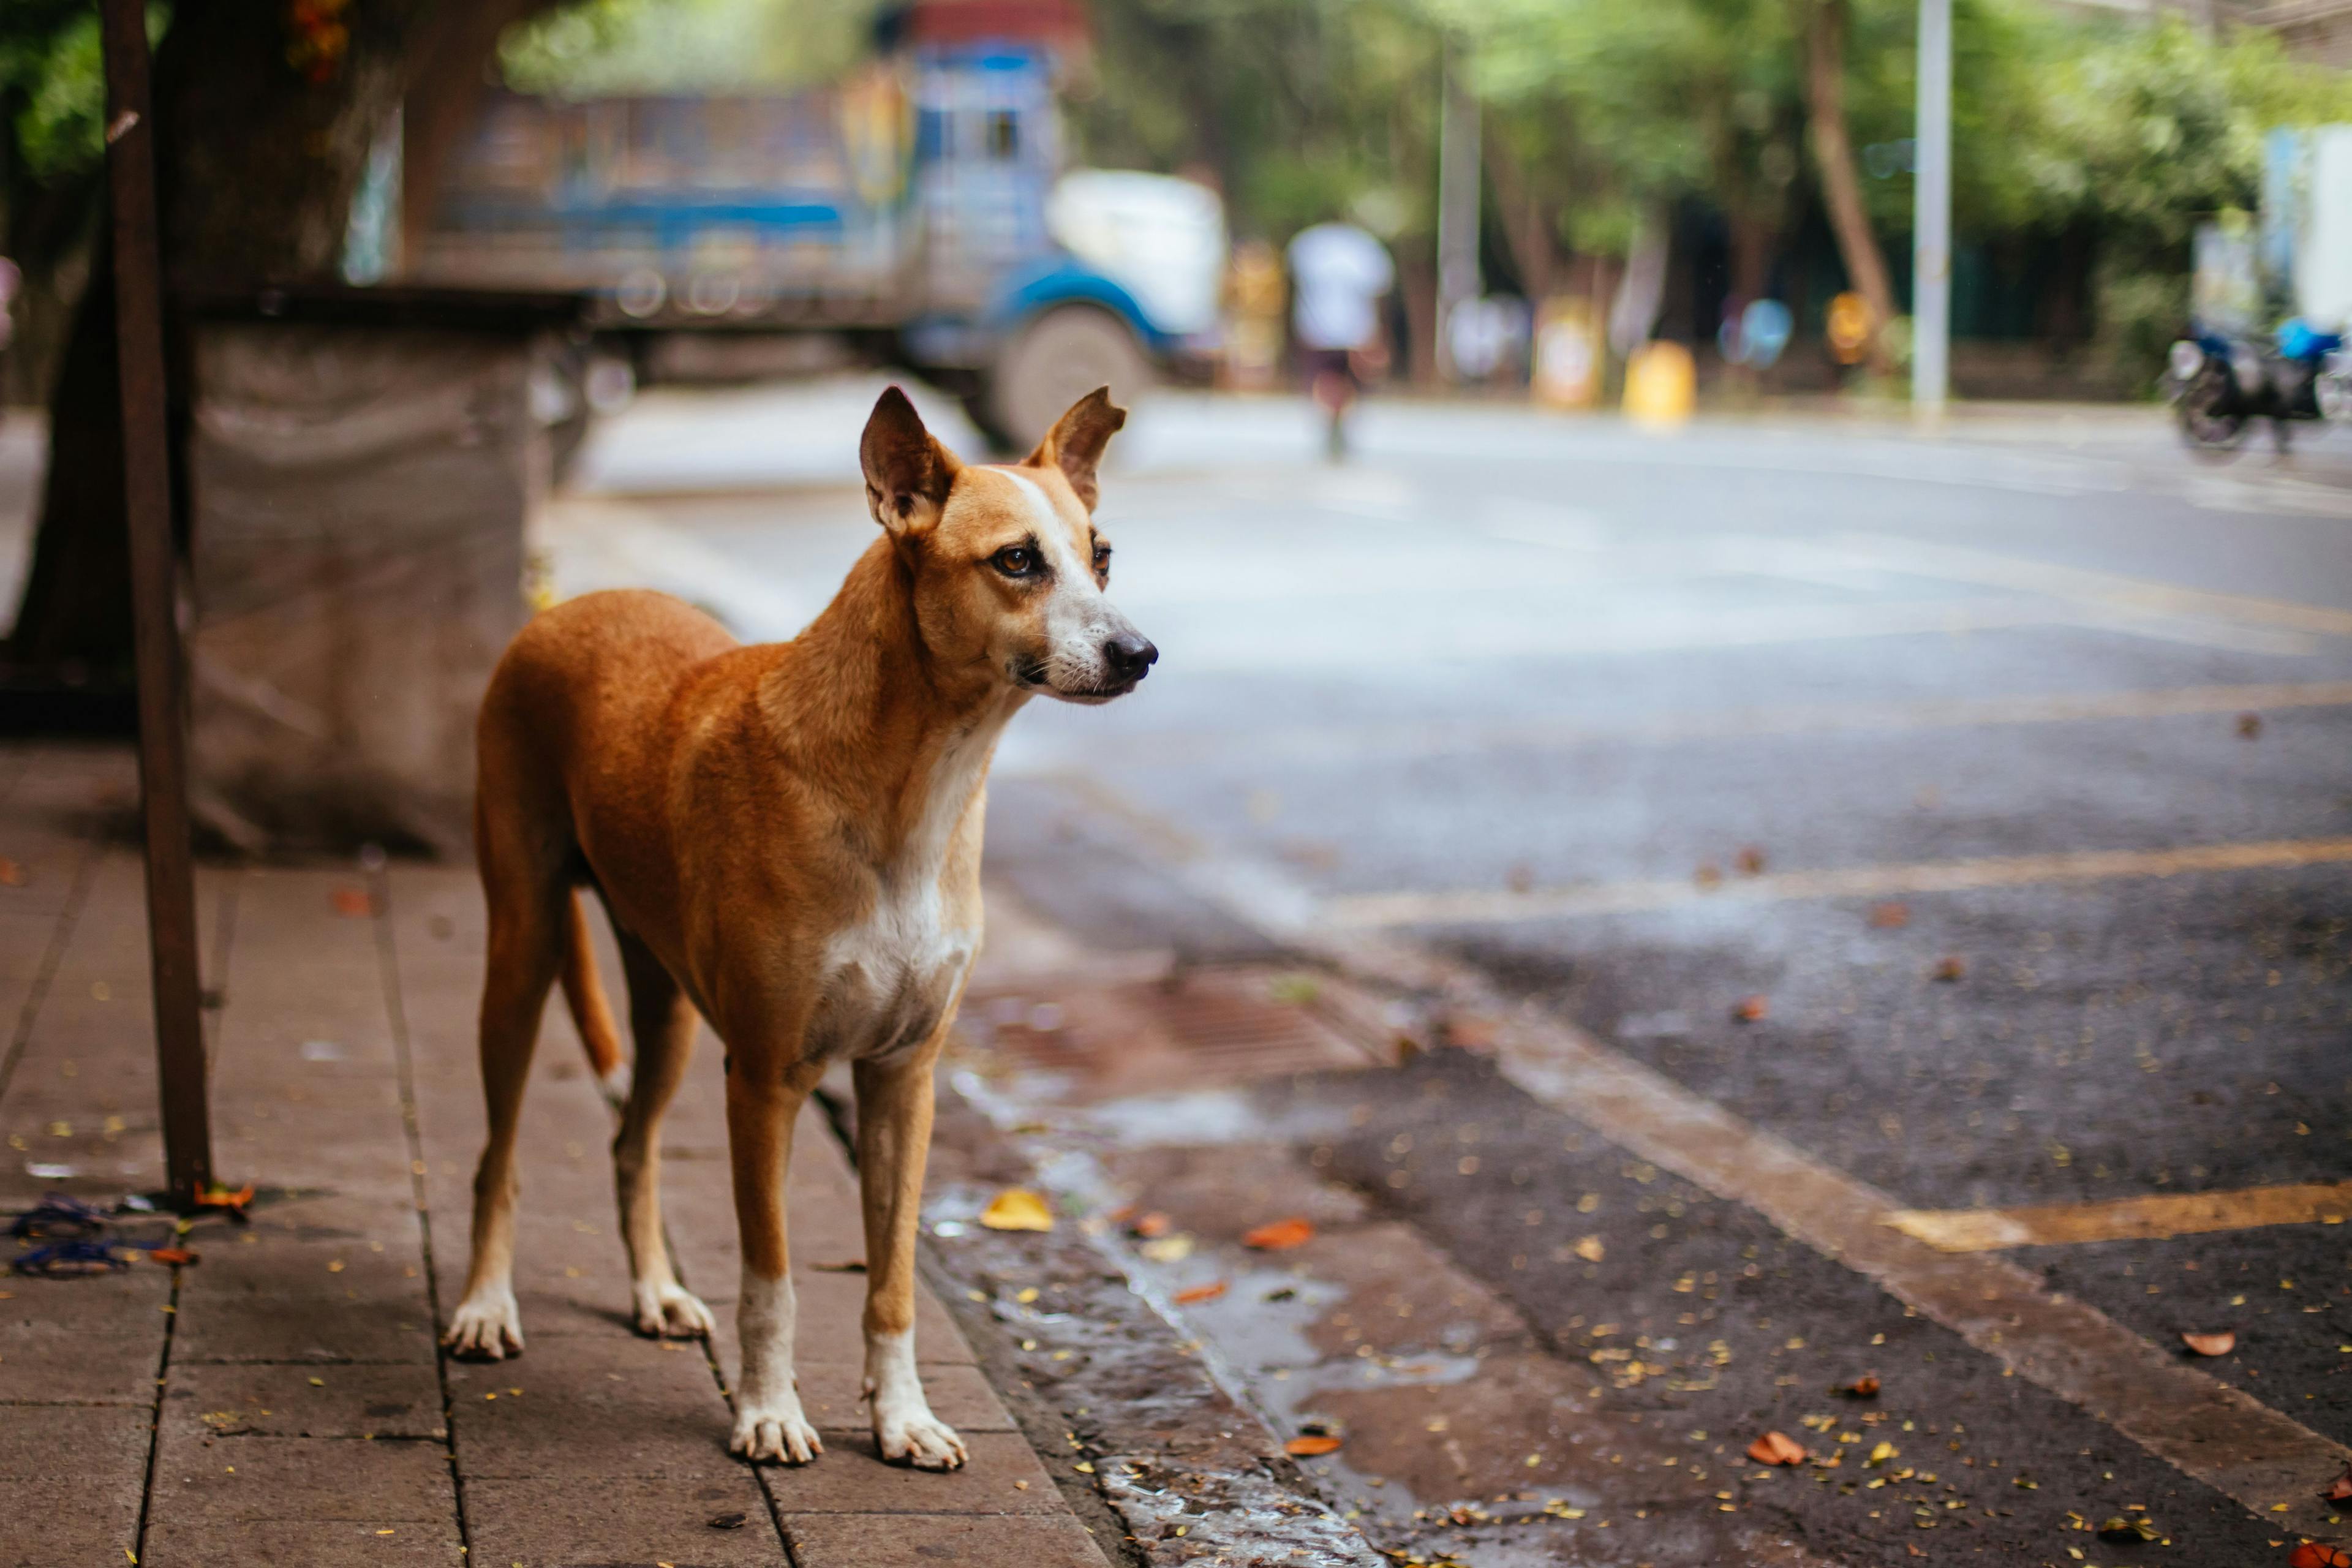 Free vaccination camps and education to help combat rabies crisis in India